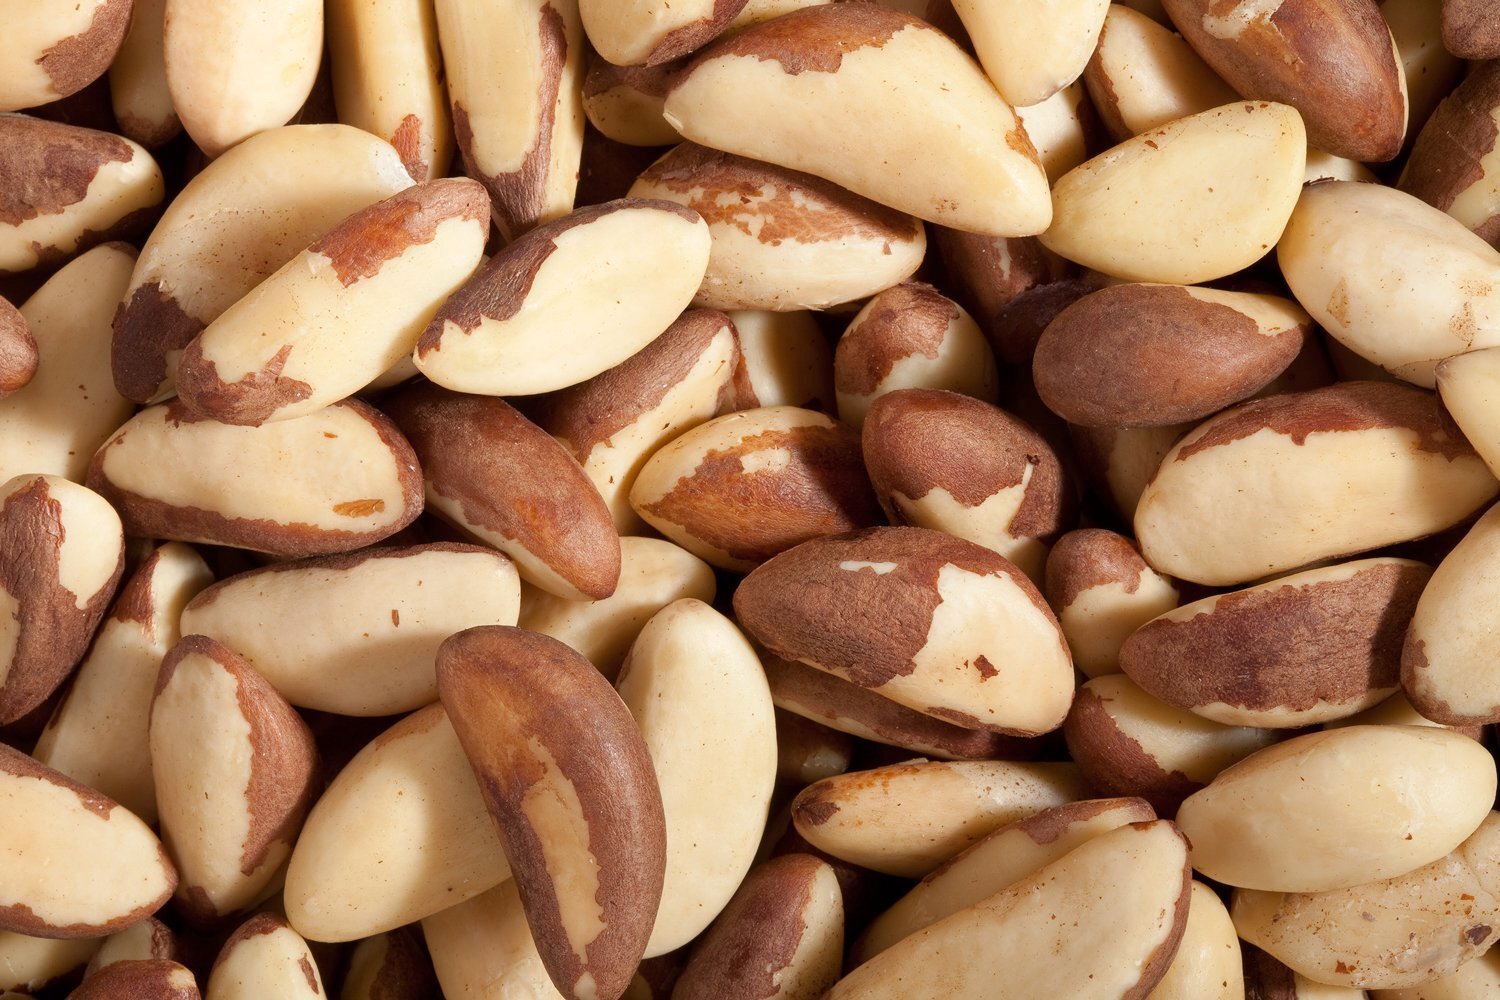 Organic Brazil Nuts: Selenium Without Toxins